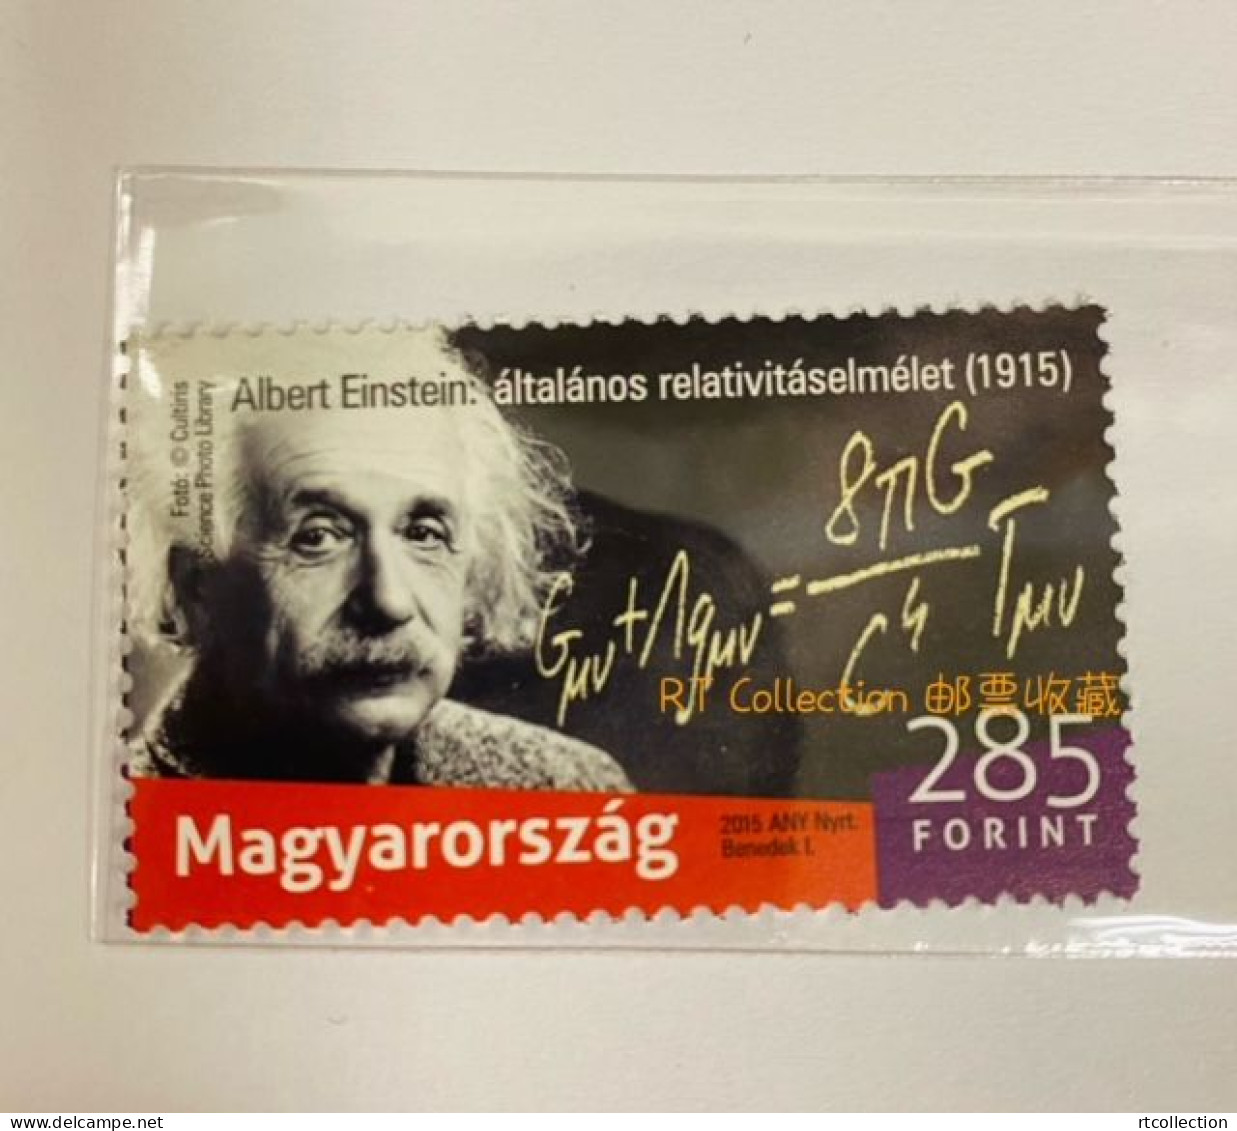 Hungary 2015 100th Anniv Albert Einstein General Theory Of Relativity Nobel Physics Physicist Sciences People Stamp MNH - Fysica